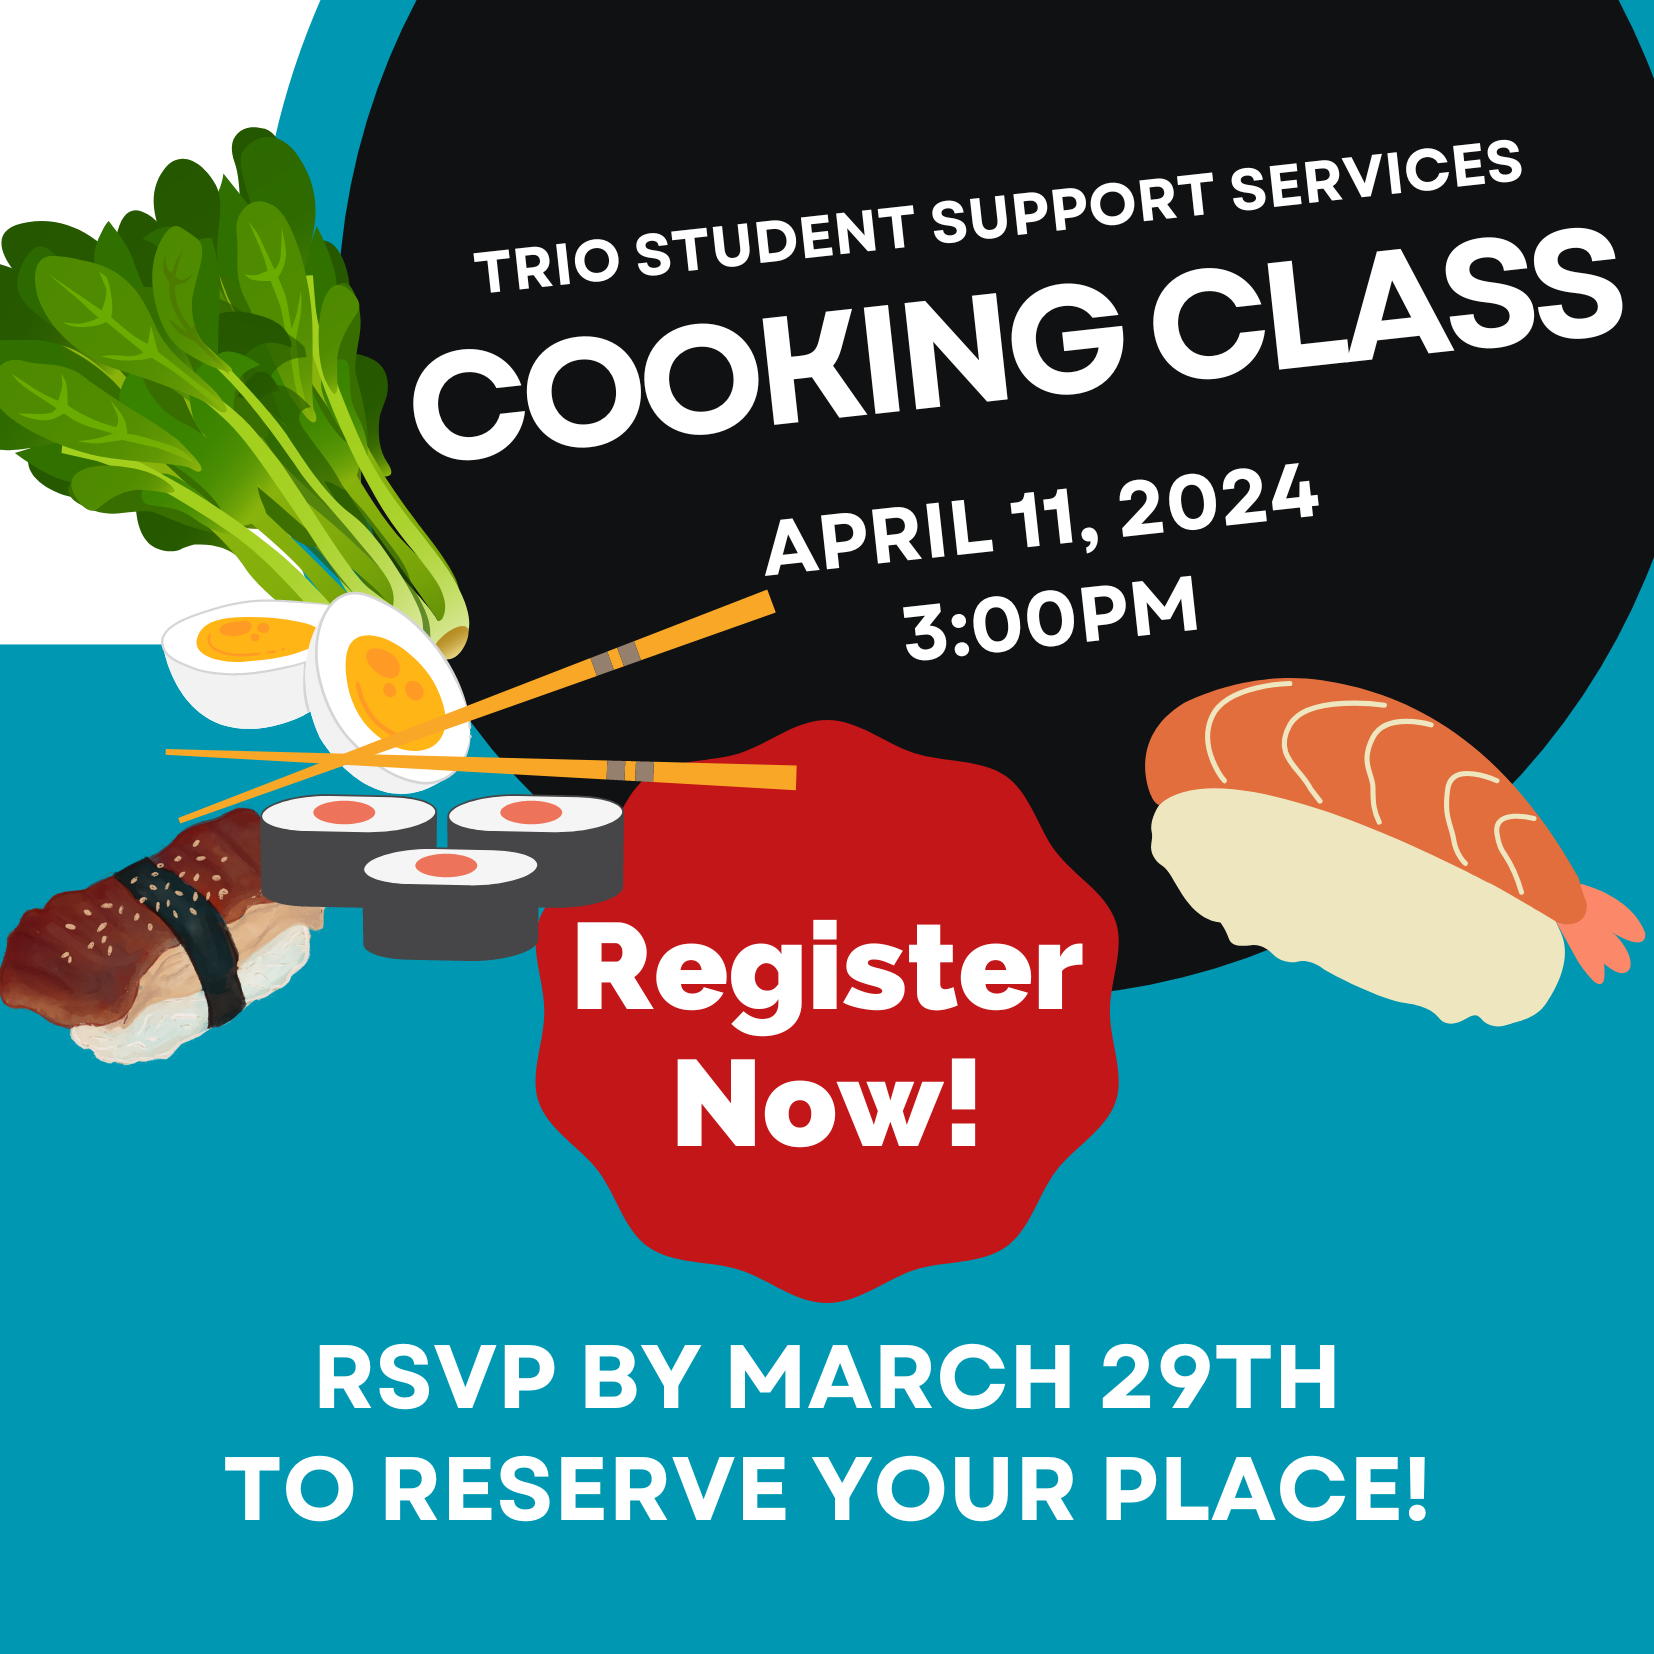 SSS Cooking Class - RSVP in SSS email deadline March 29th - April 11, 2024